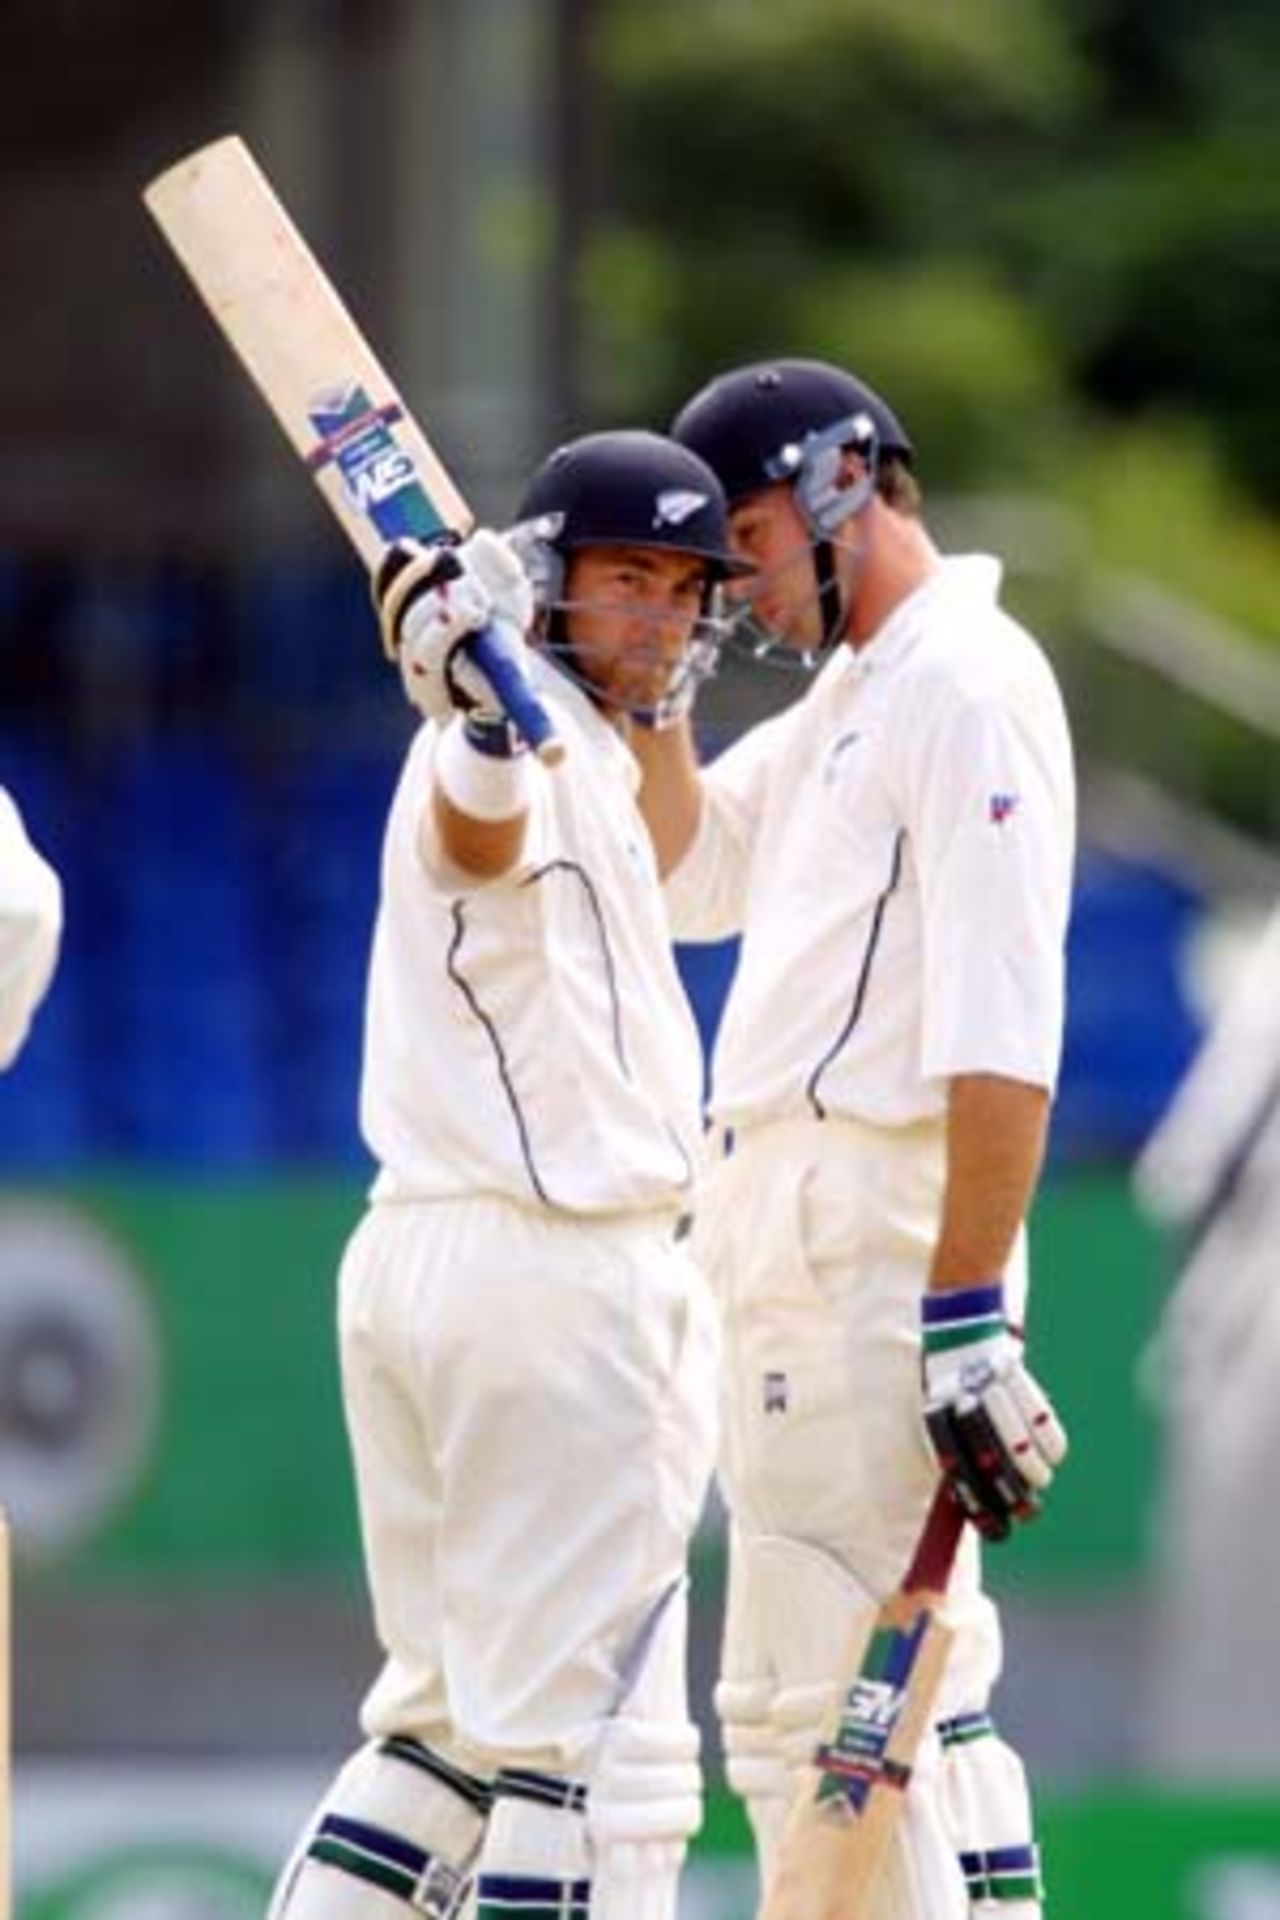 New Zealand batsman Craig McMillan raises his bat in celebration of reaching 50, during a partnership of 111 for the fifth wicket in New Zealand's first innings with Stephen Fleming (right). McMillan went on to score 54. 1st Test: New Zealand v Pakistan at Eden Park, Auckland, 8-12 March 2001 (10 March 2001).